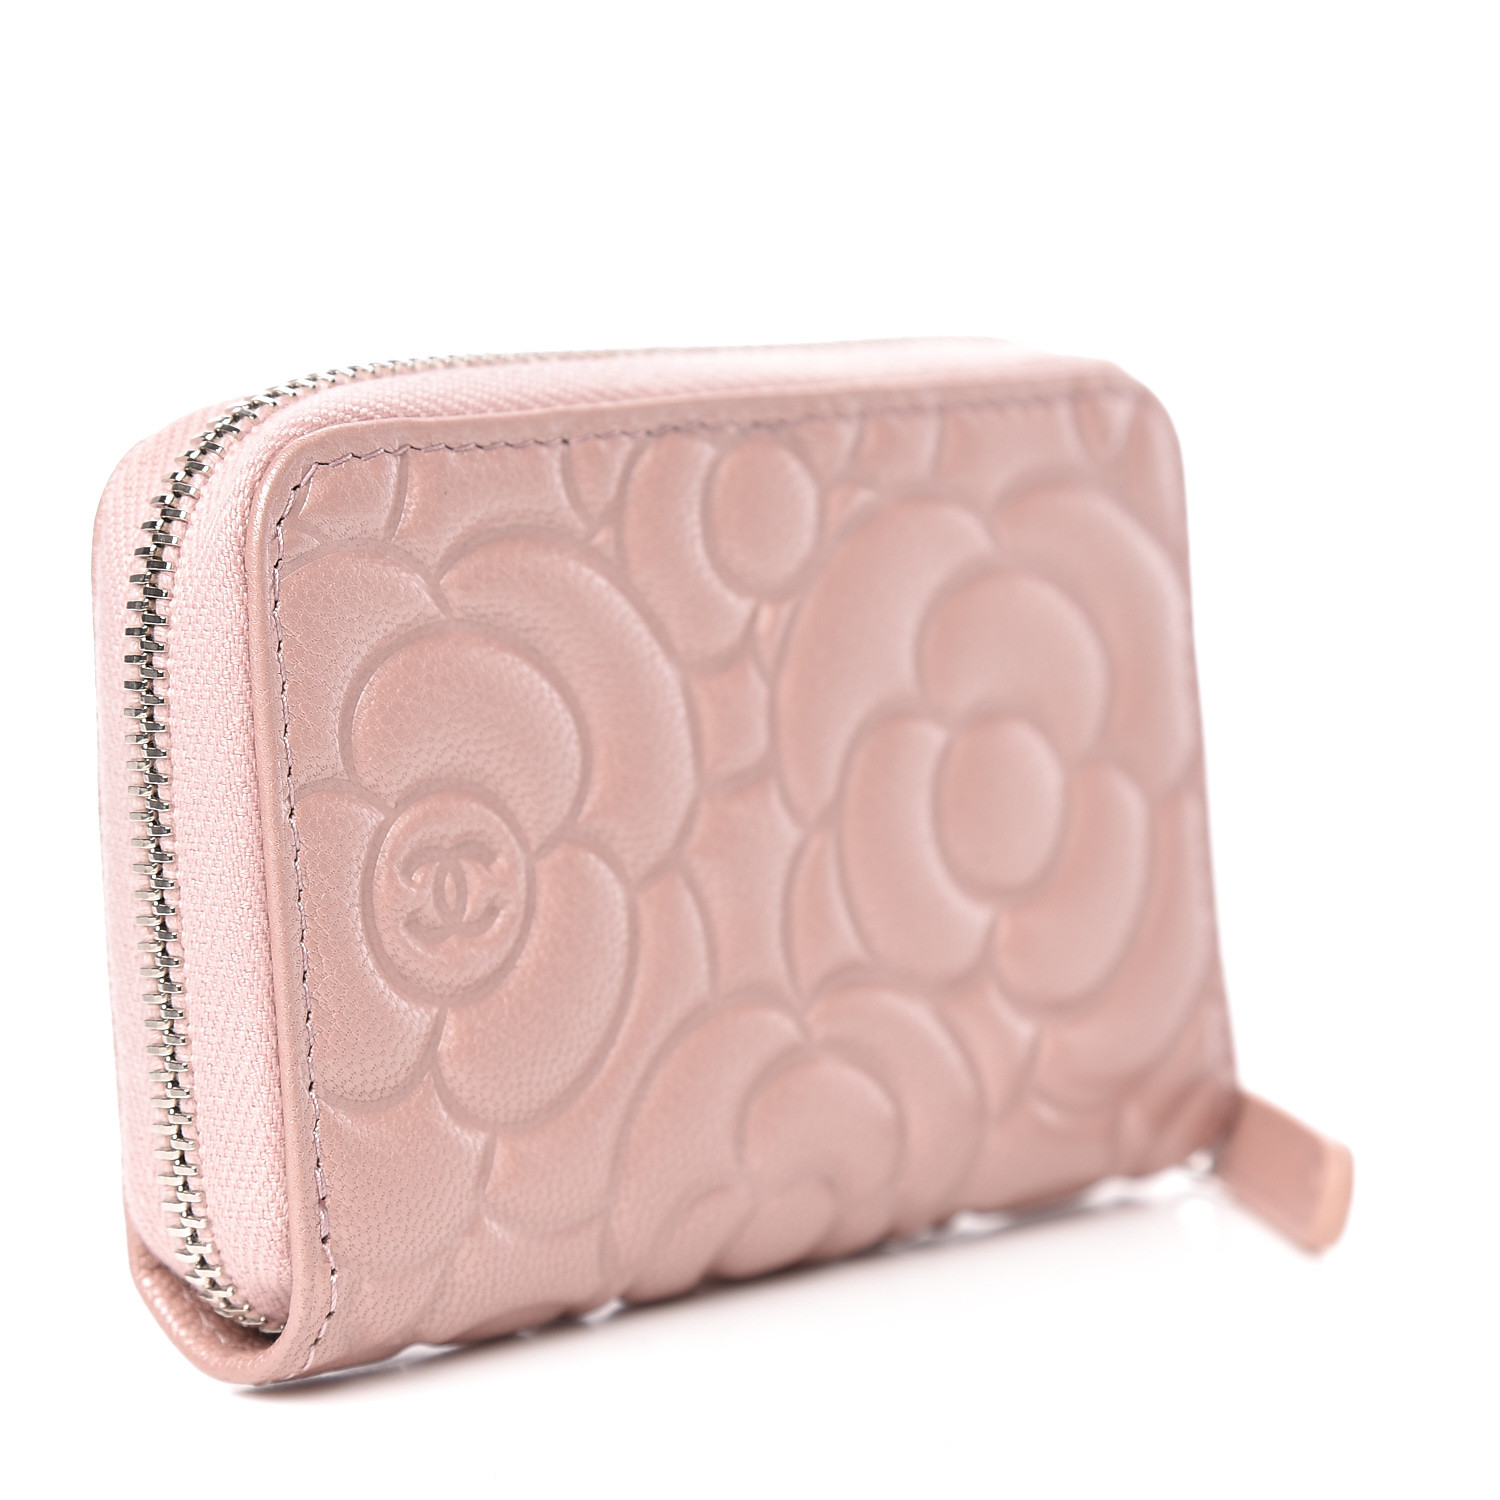 CHANEL Goatskin Camellia Embossed Zip Coin Purse Light Pink 464096